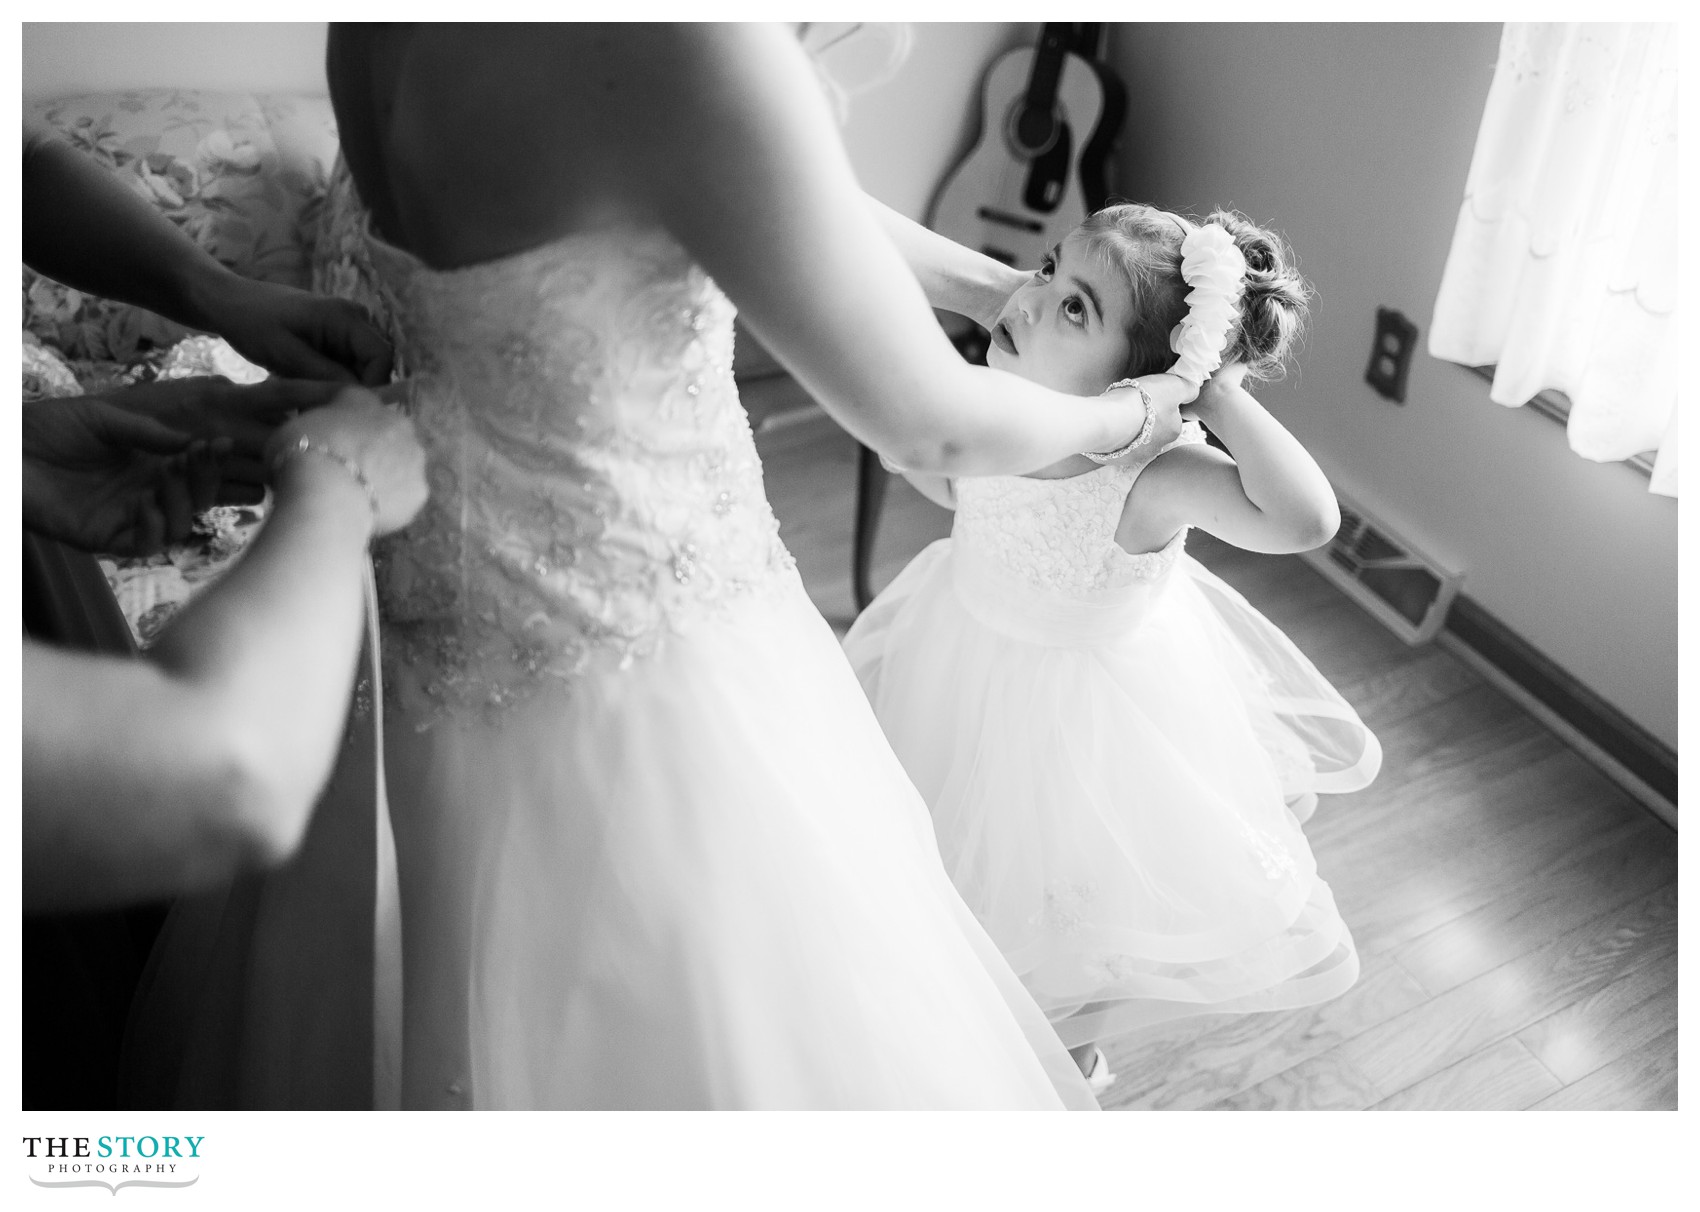 flower girl looking up to bride getting her dress on